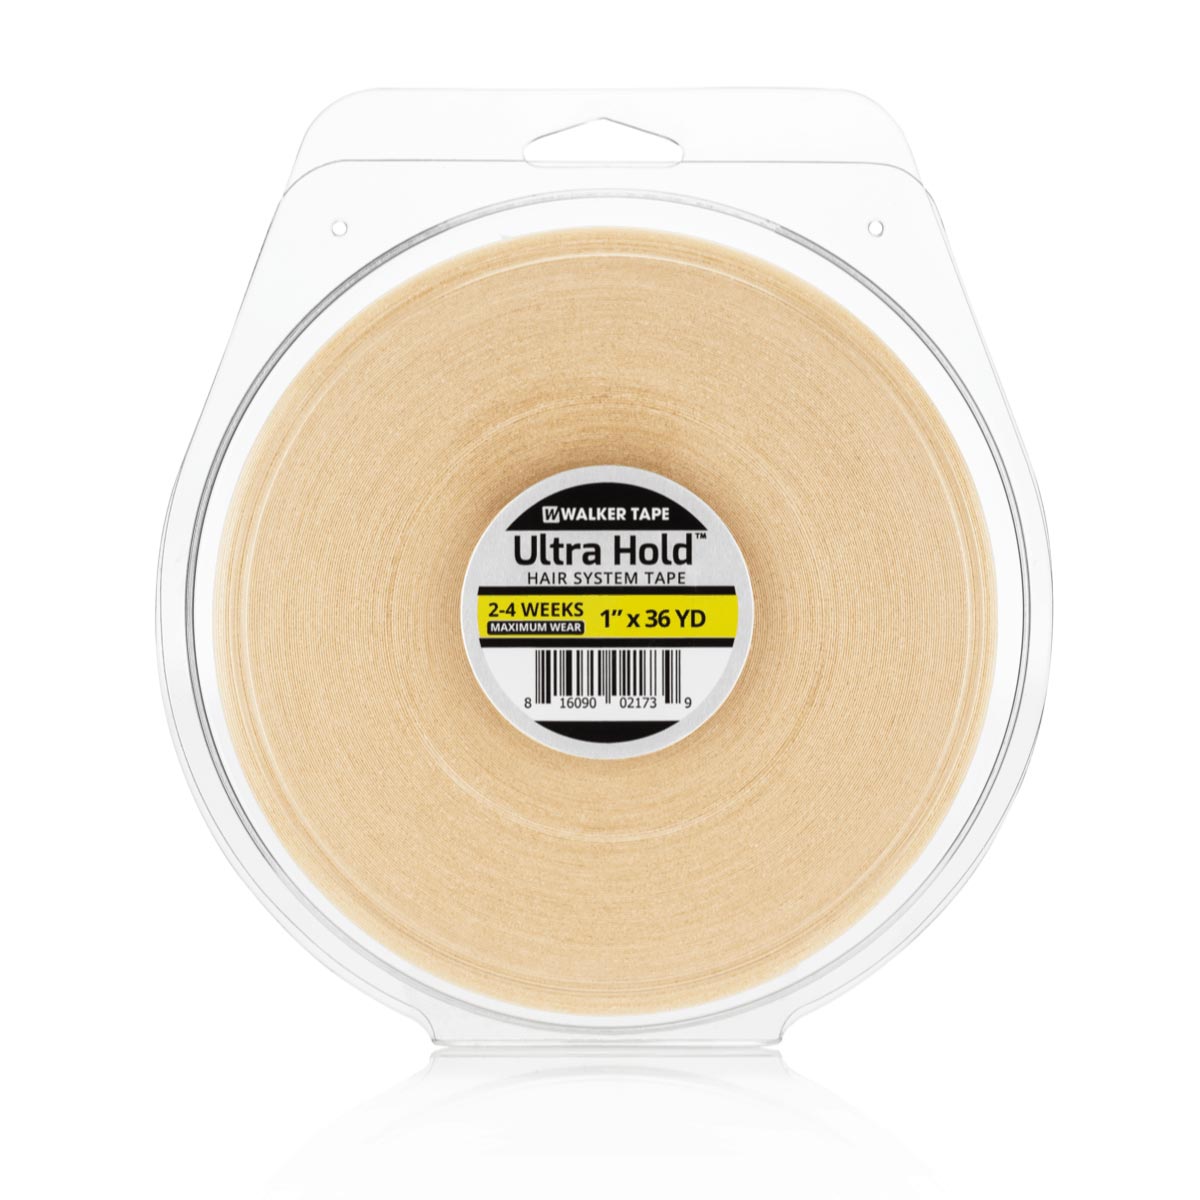 Buy All New Ultra Hold Tape, Wig Tapes